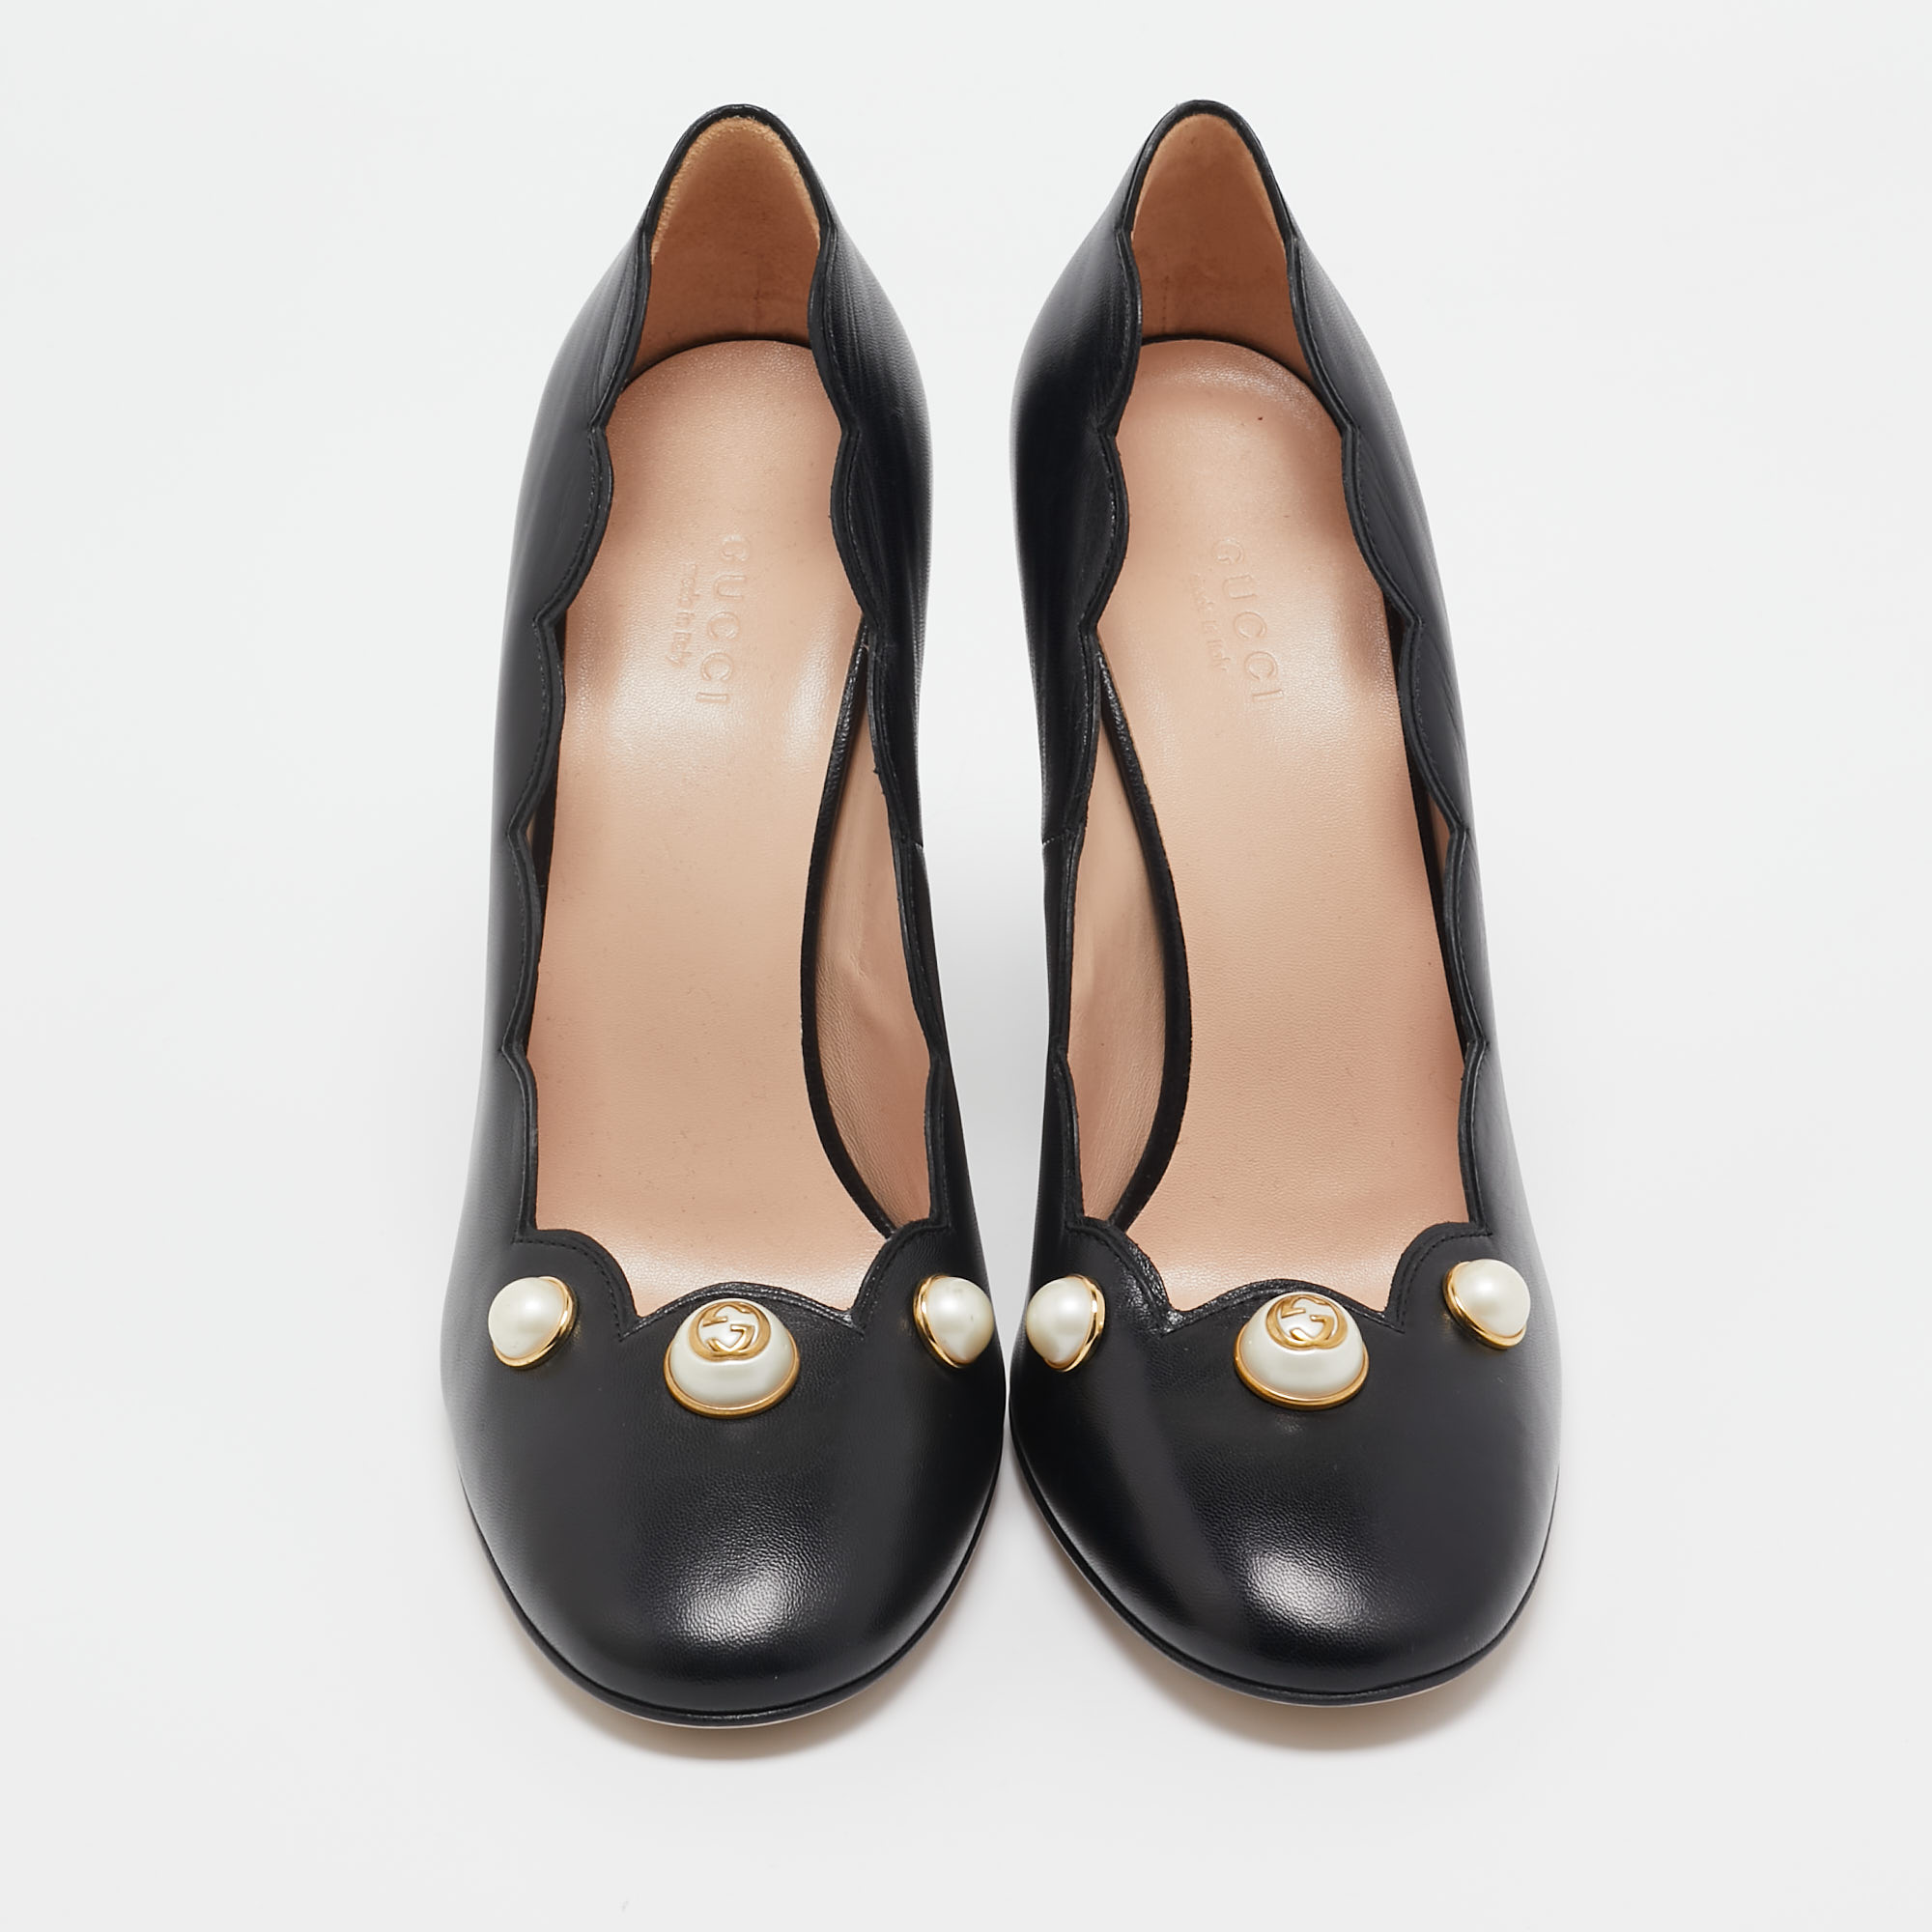 Gucci Black Leather GG Pearl Detail Pumps Size 39.5